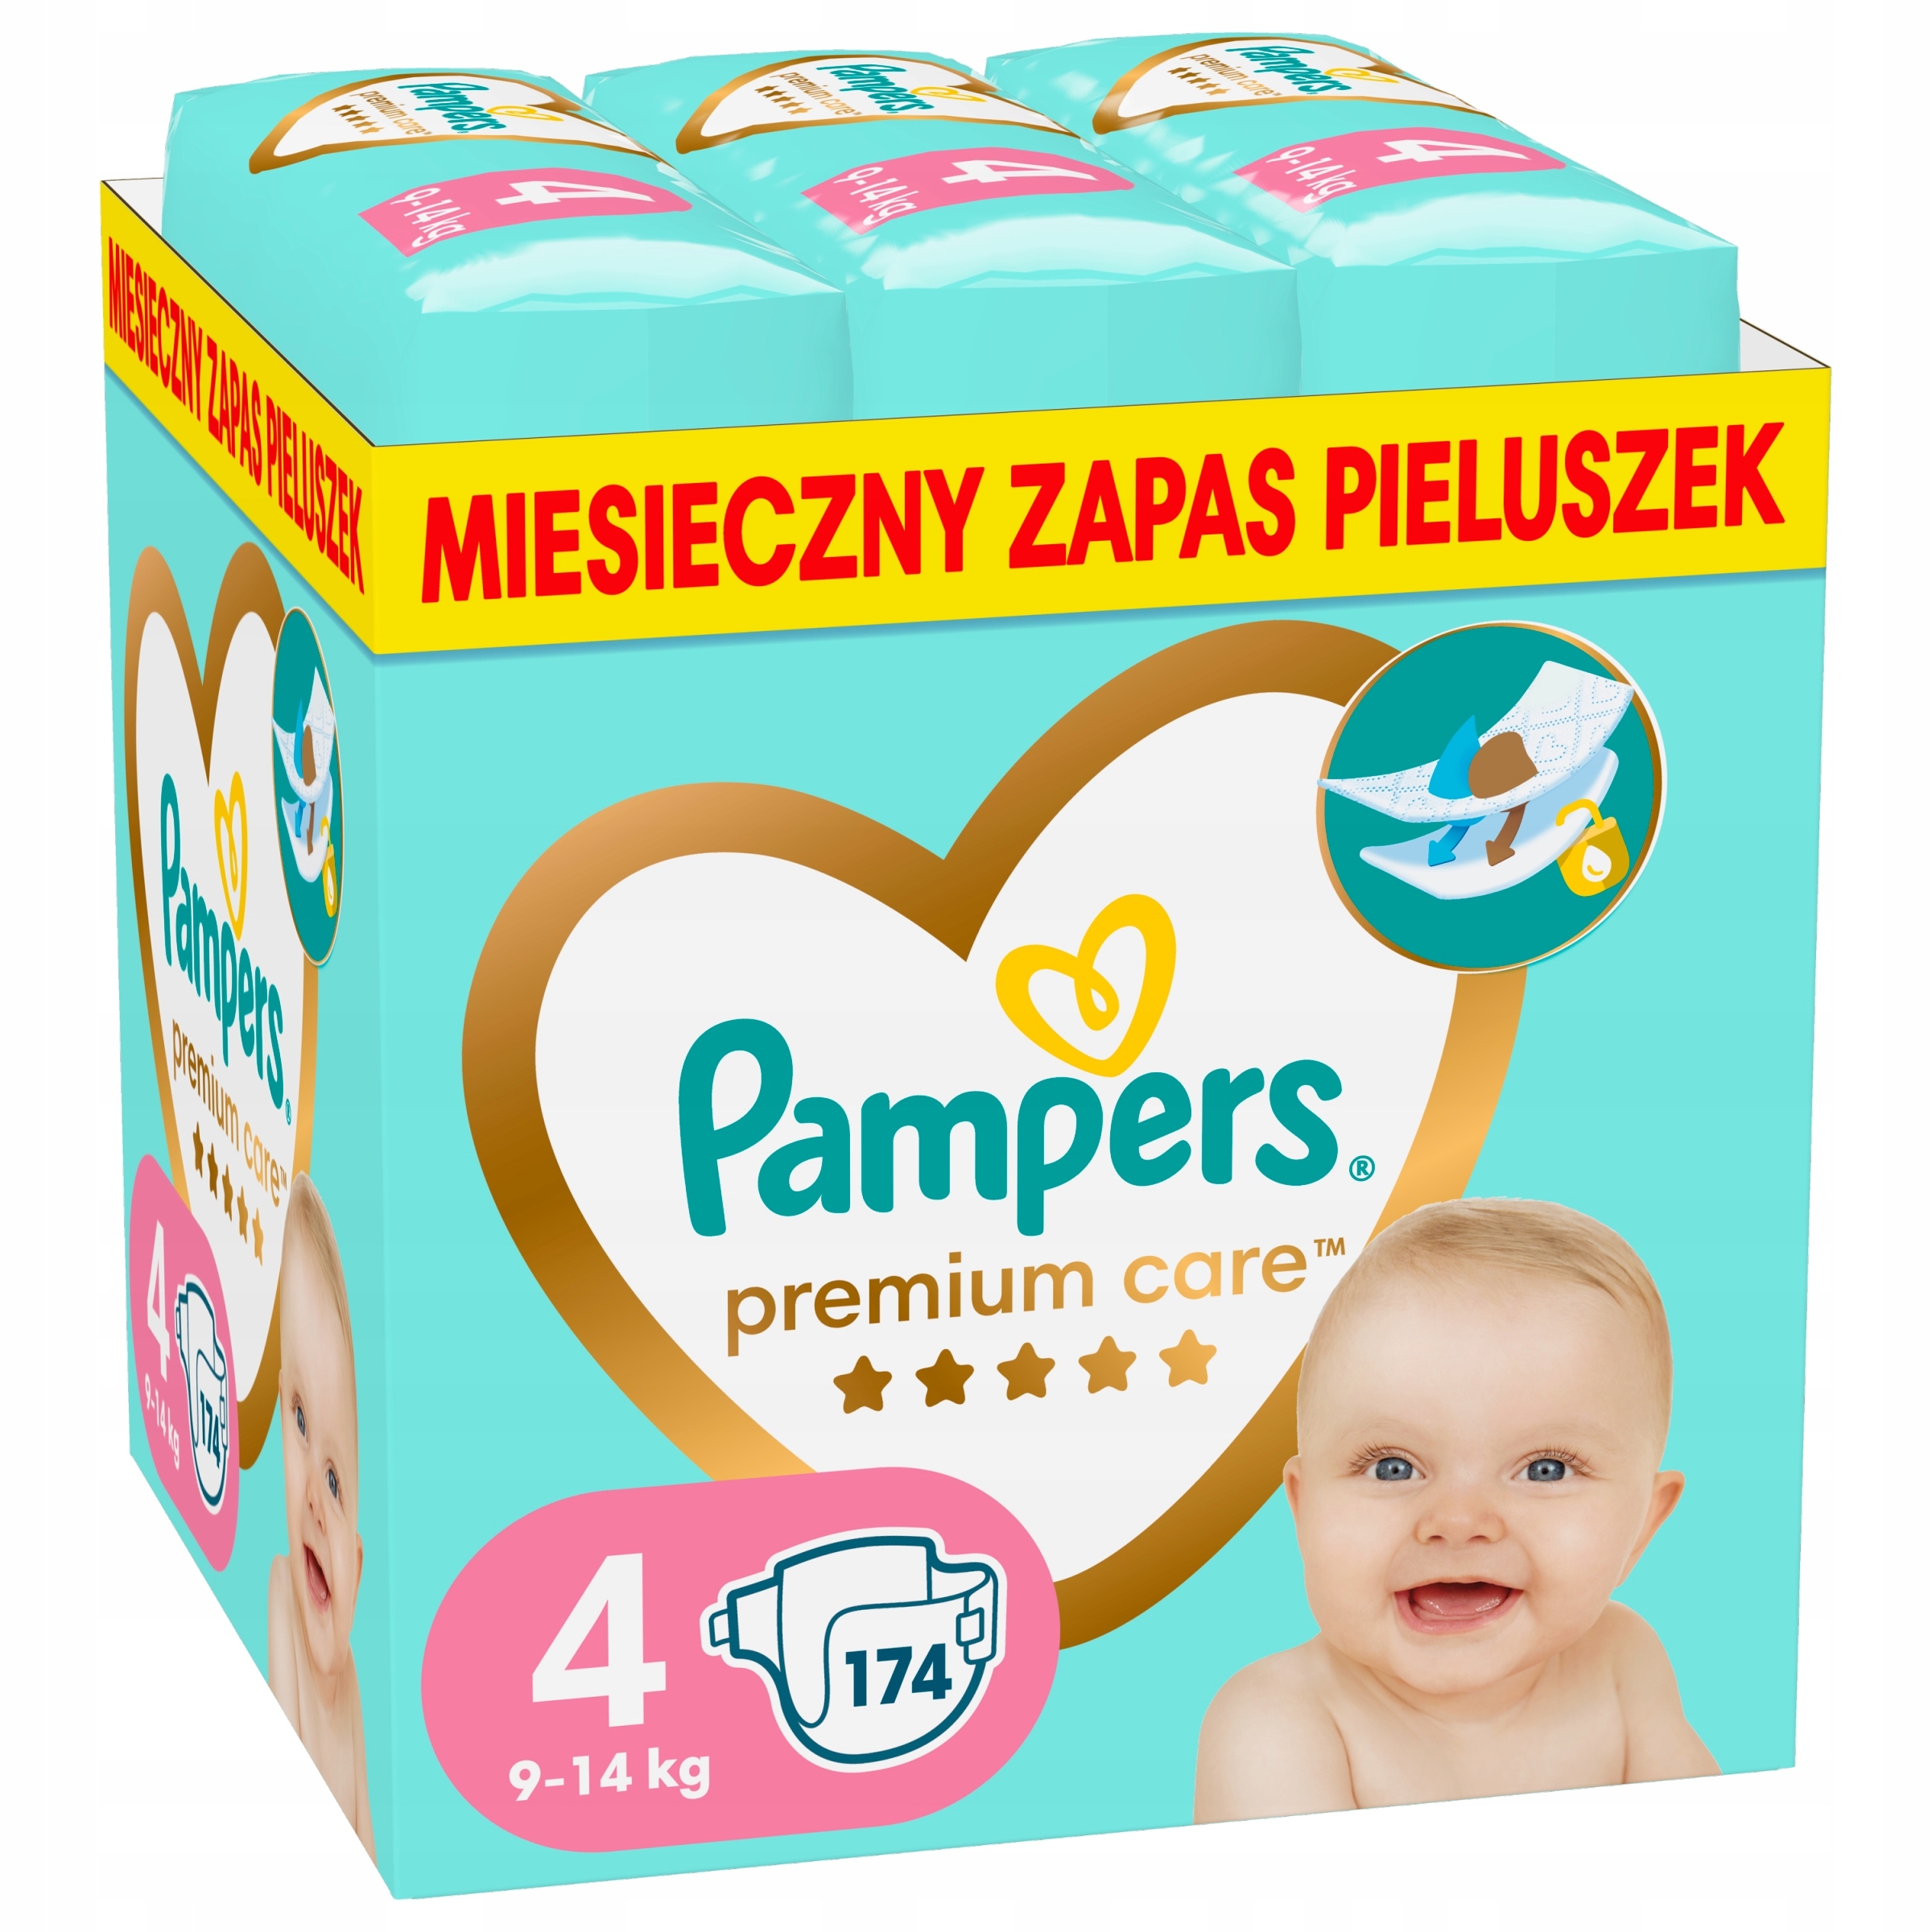 pampers active baby-dry pieluchy rozmiar 4 maxi 7-14kg 174 sztuk